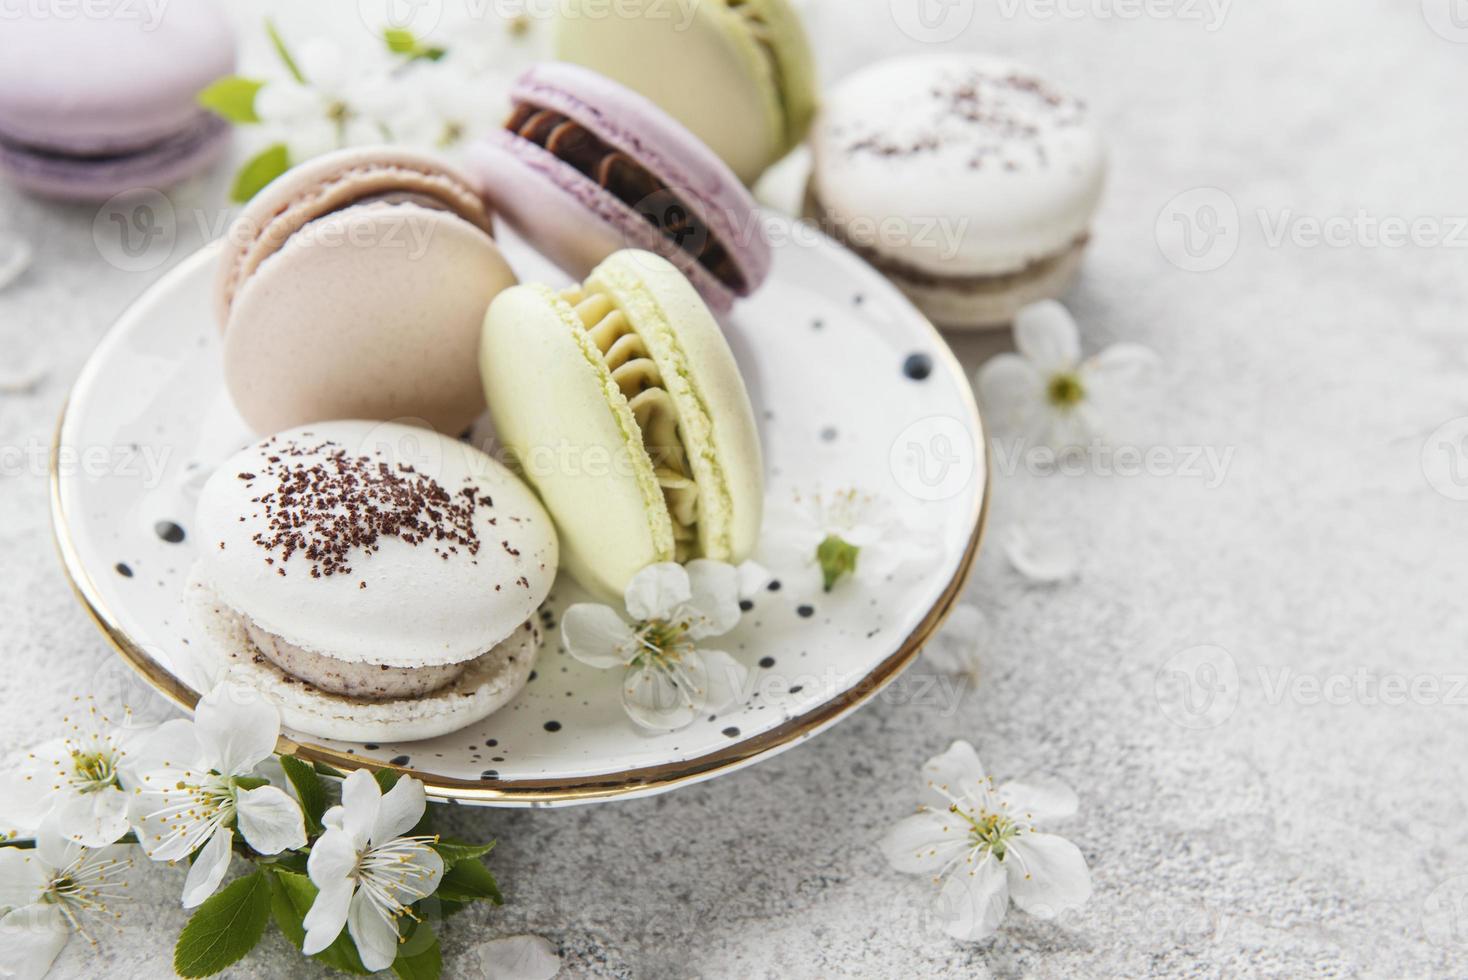 French sweet macaroons photo